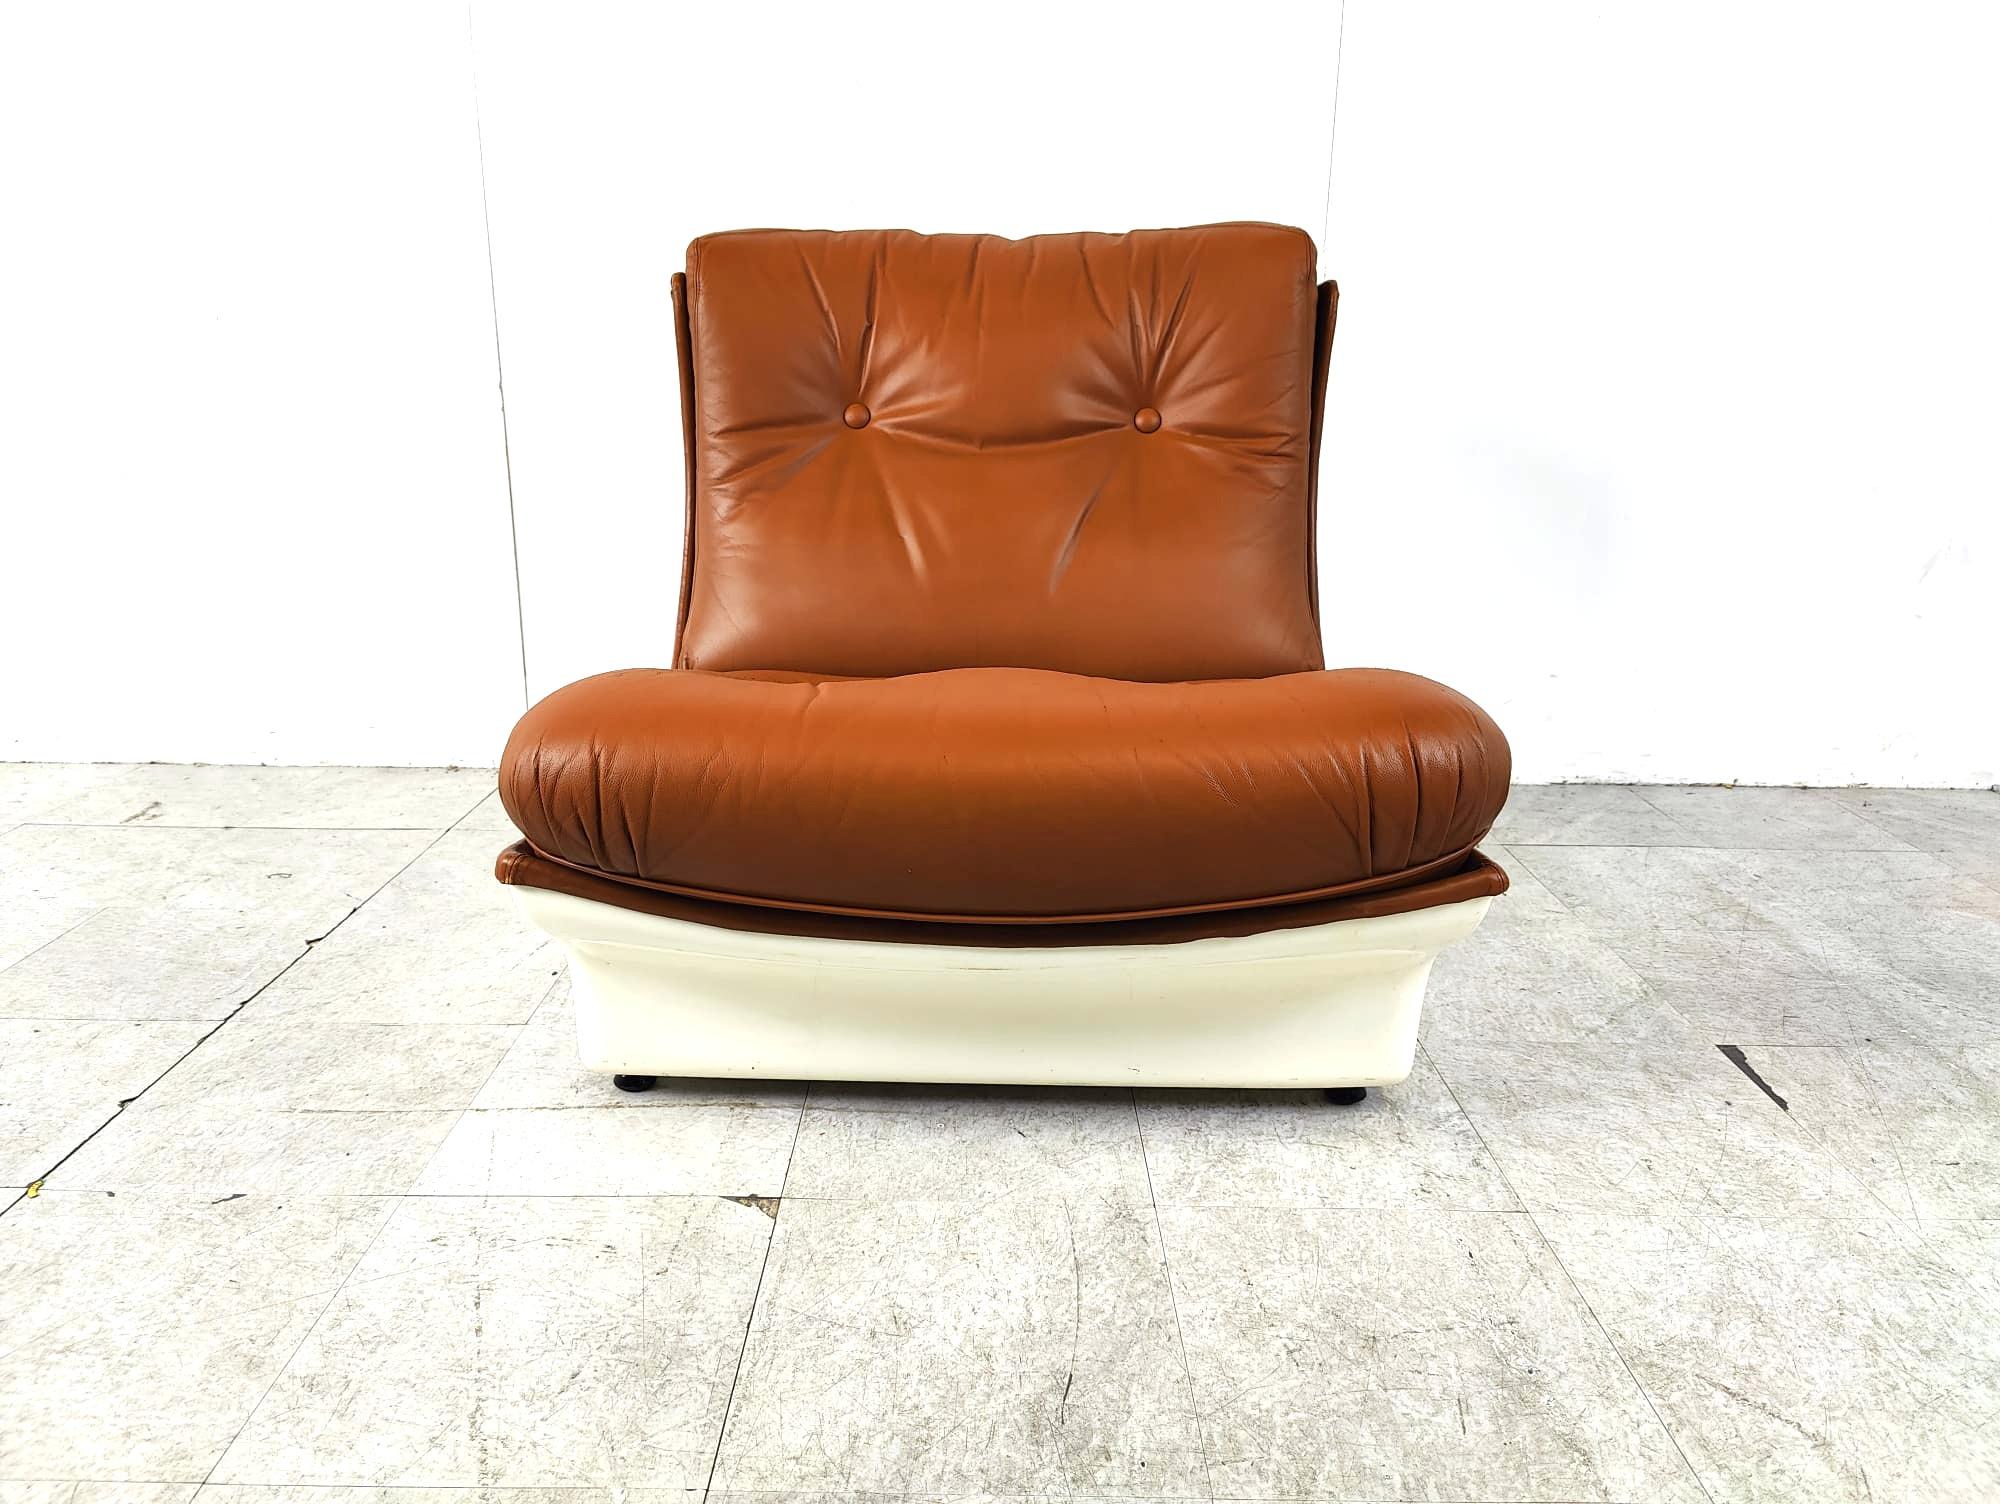 Space age leather lounge chair by Airborne international, 1970s For Sale 4